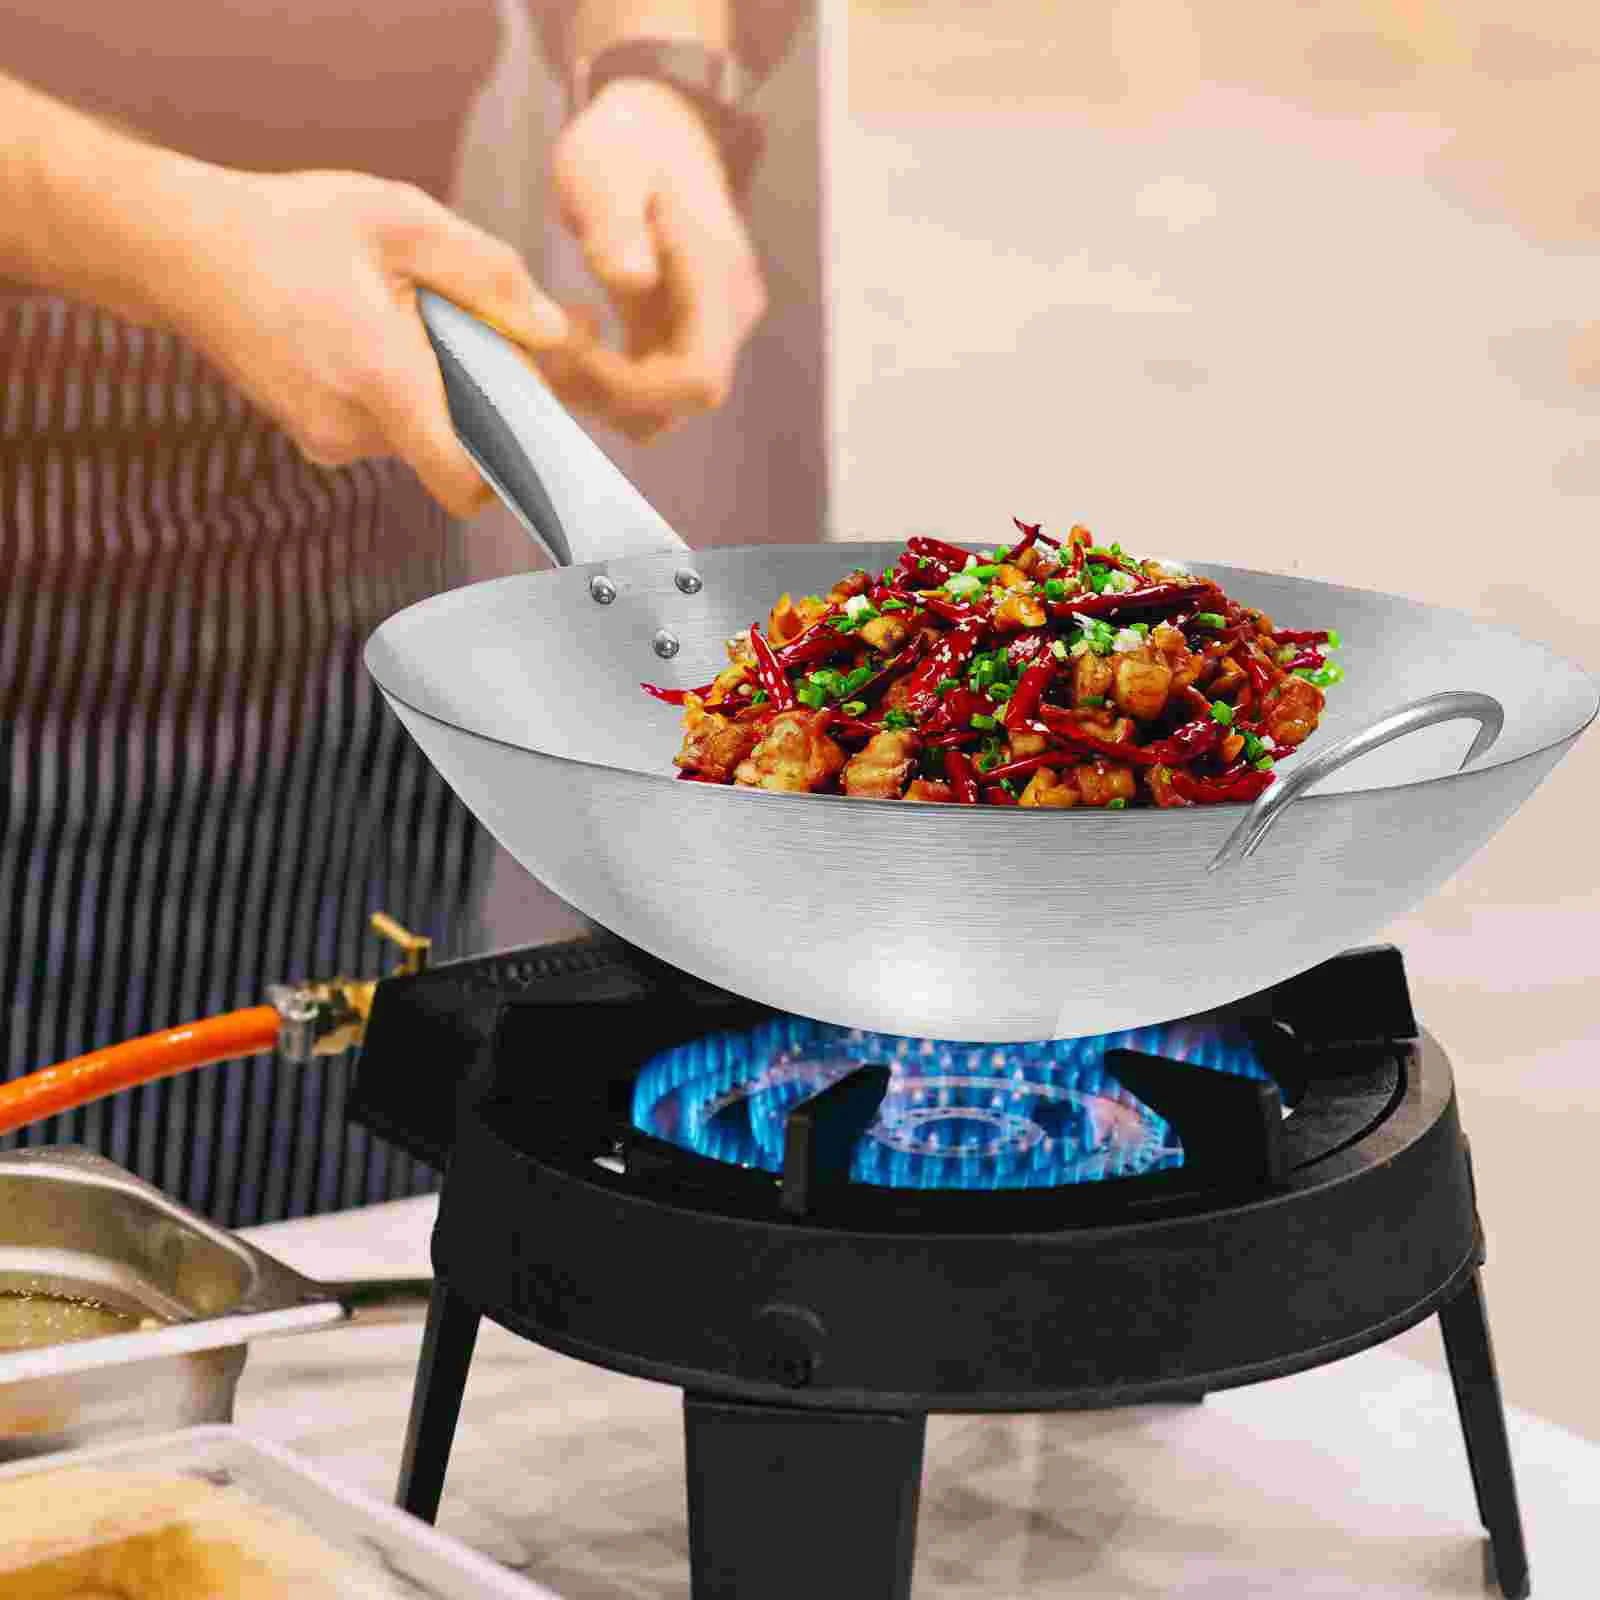 

Stainless Steel Saucepan Wok Stir-fry Home Induction Cooker Pot Non Stick Household Handle Frying Cooking Coating Work Pans